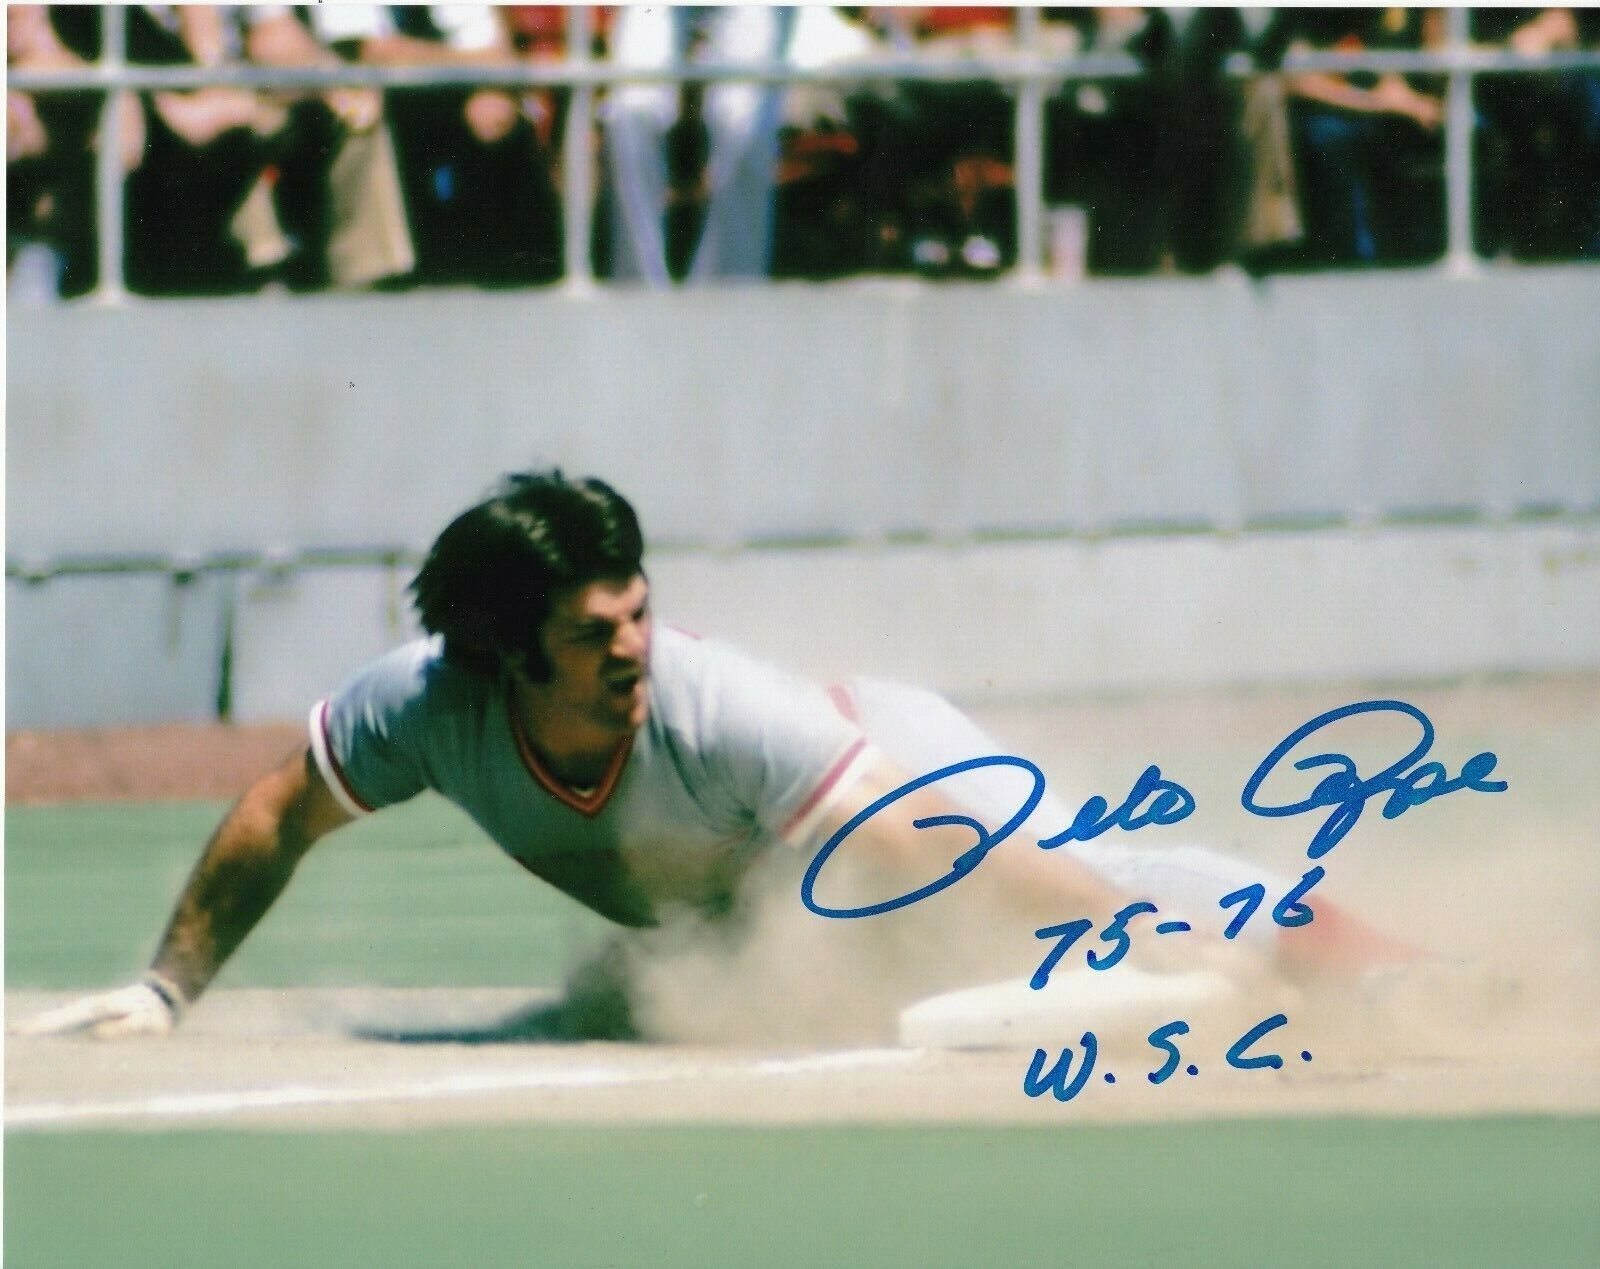 PETE ROSE CINCINNATI REDS 75-76 WS CHAMPS ACTION SIGNED 8x10